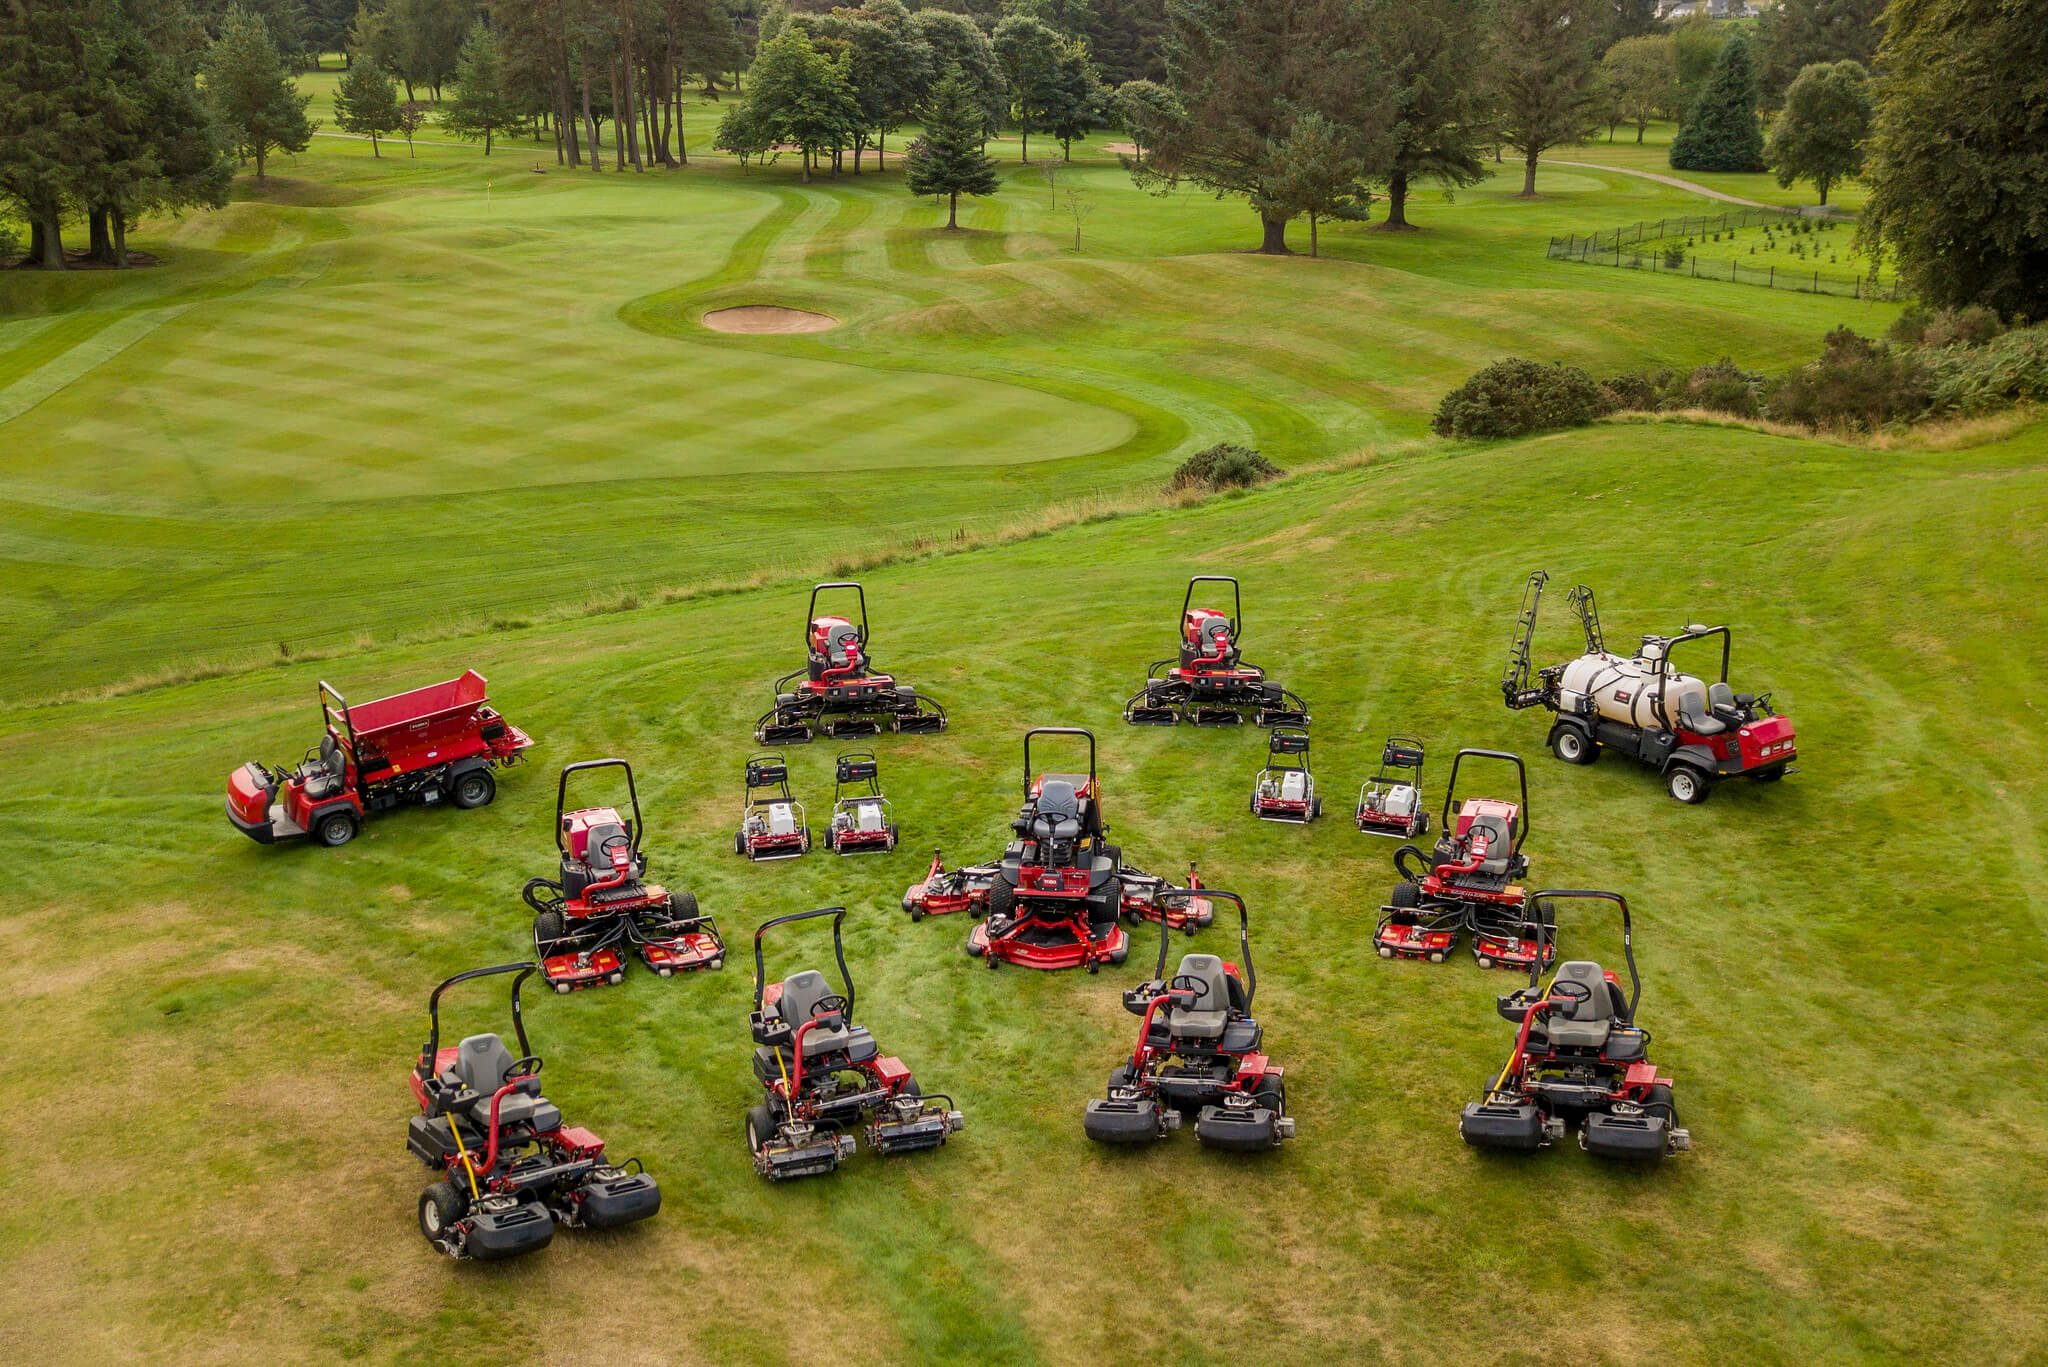 A fleet of Toro machinery on the golf course at Deeside golf club.